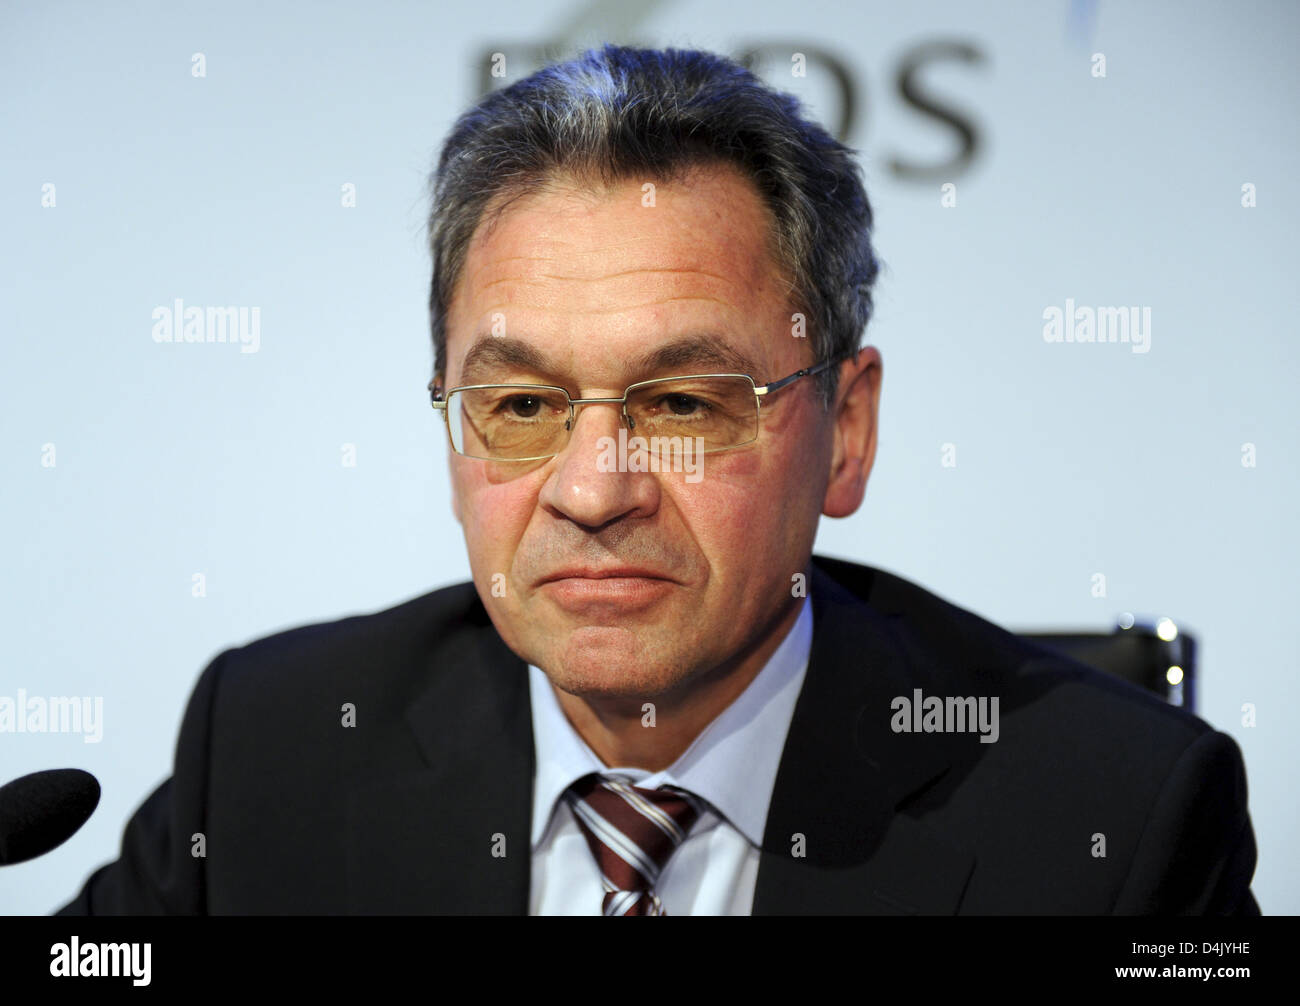 EADS CFO Hans <b>Peter Ring</b> attends the group?s balance press conference in ... - eads-cfo-hans-peter-ring-attends-the-groups-balance-press-conference-D4JYHE